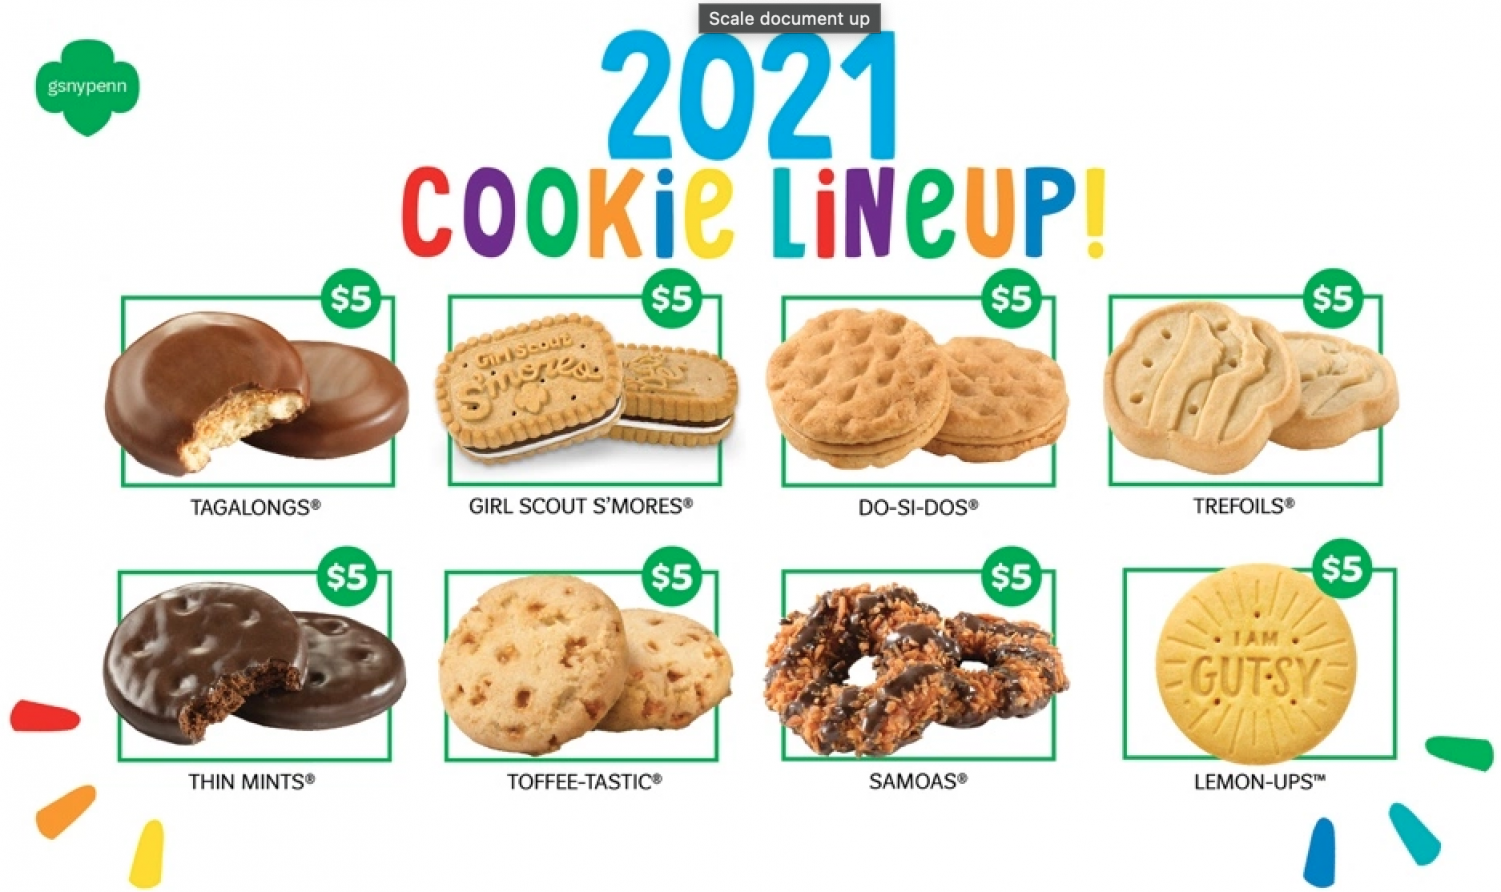 2021 girl scout cookie lineup “badder” up! The Hiller